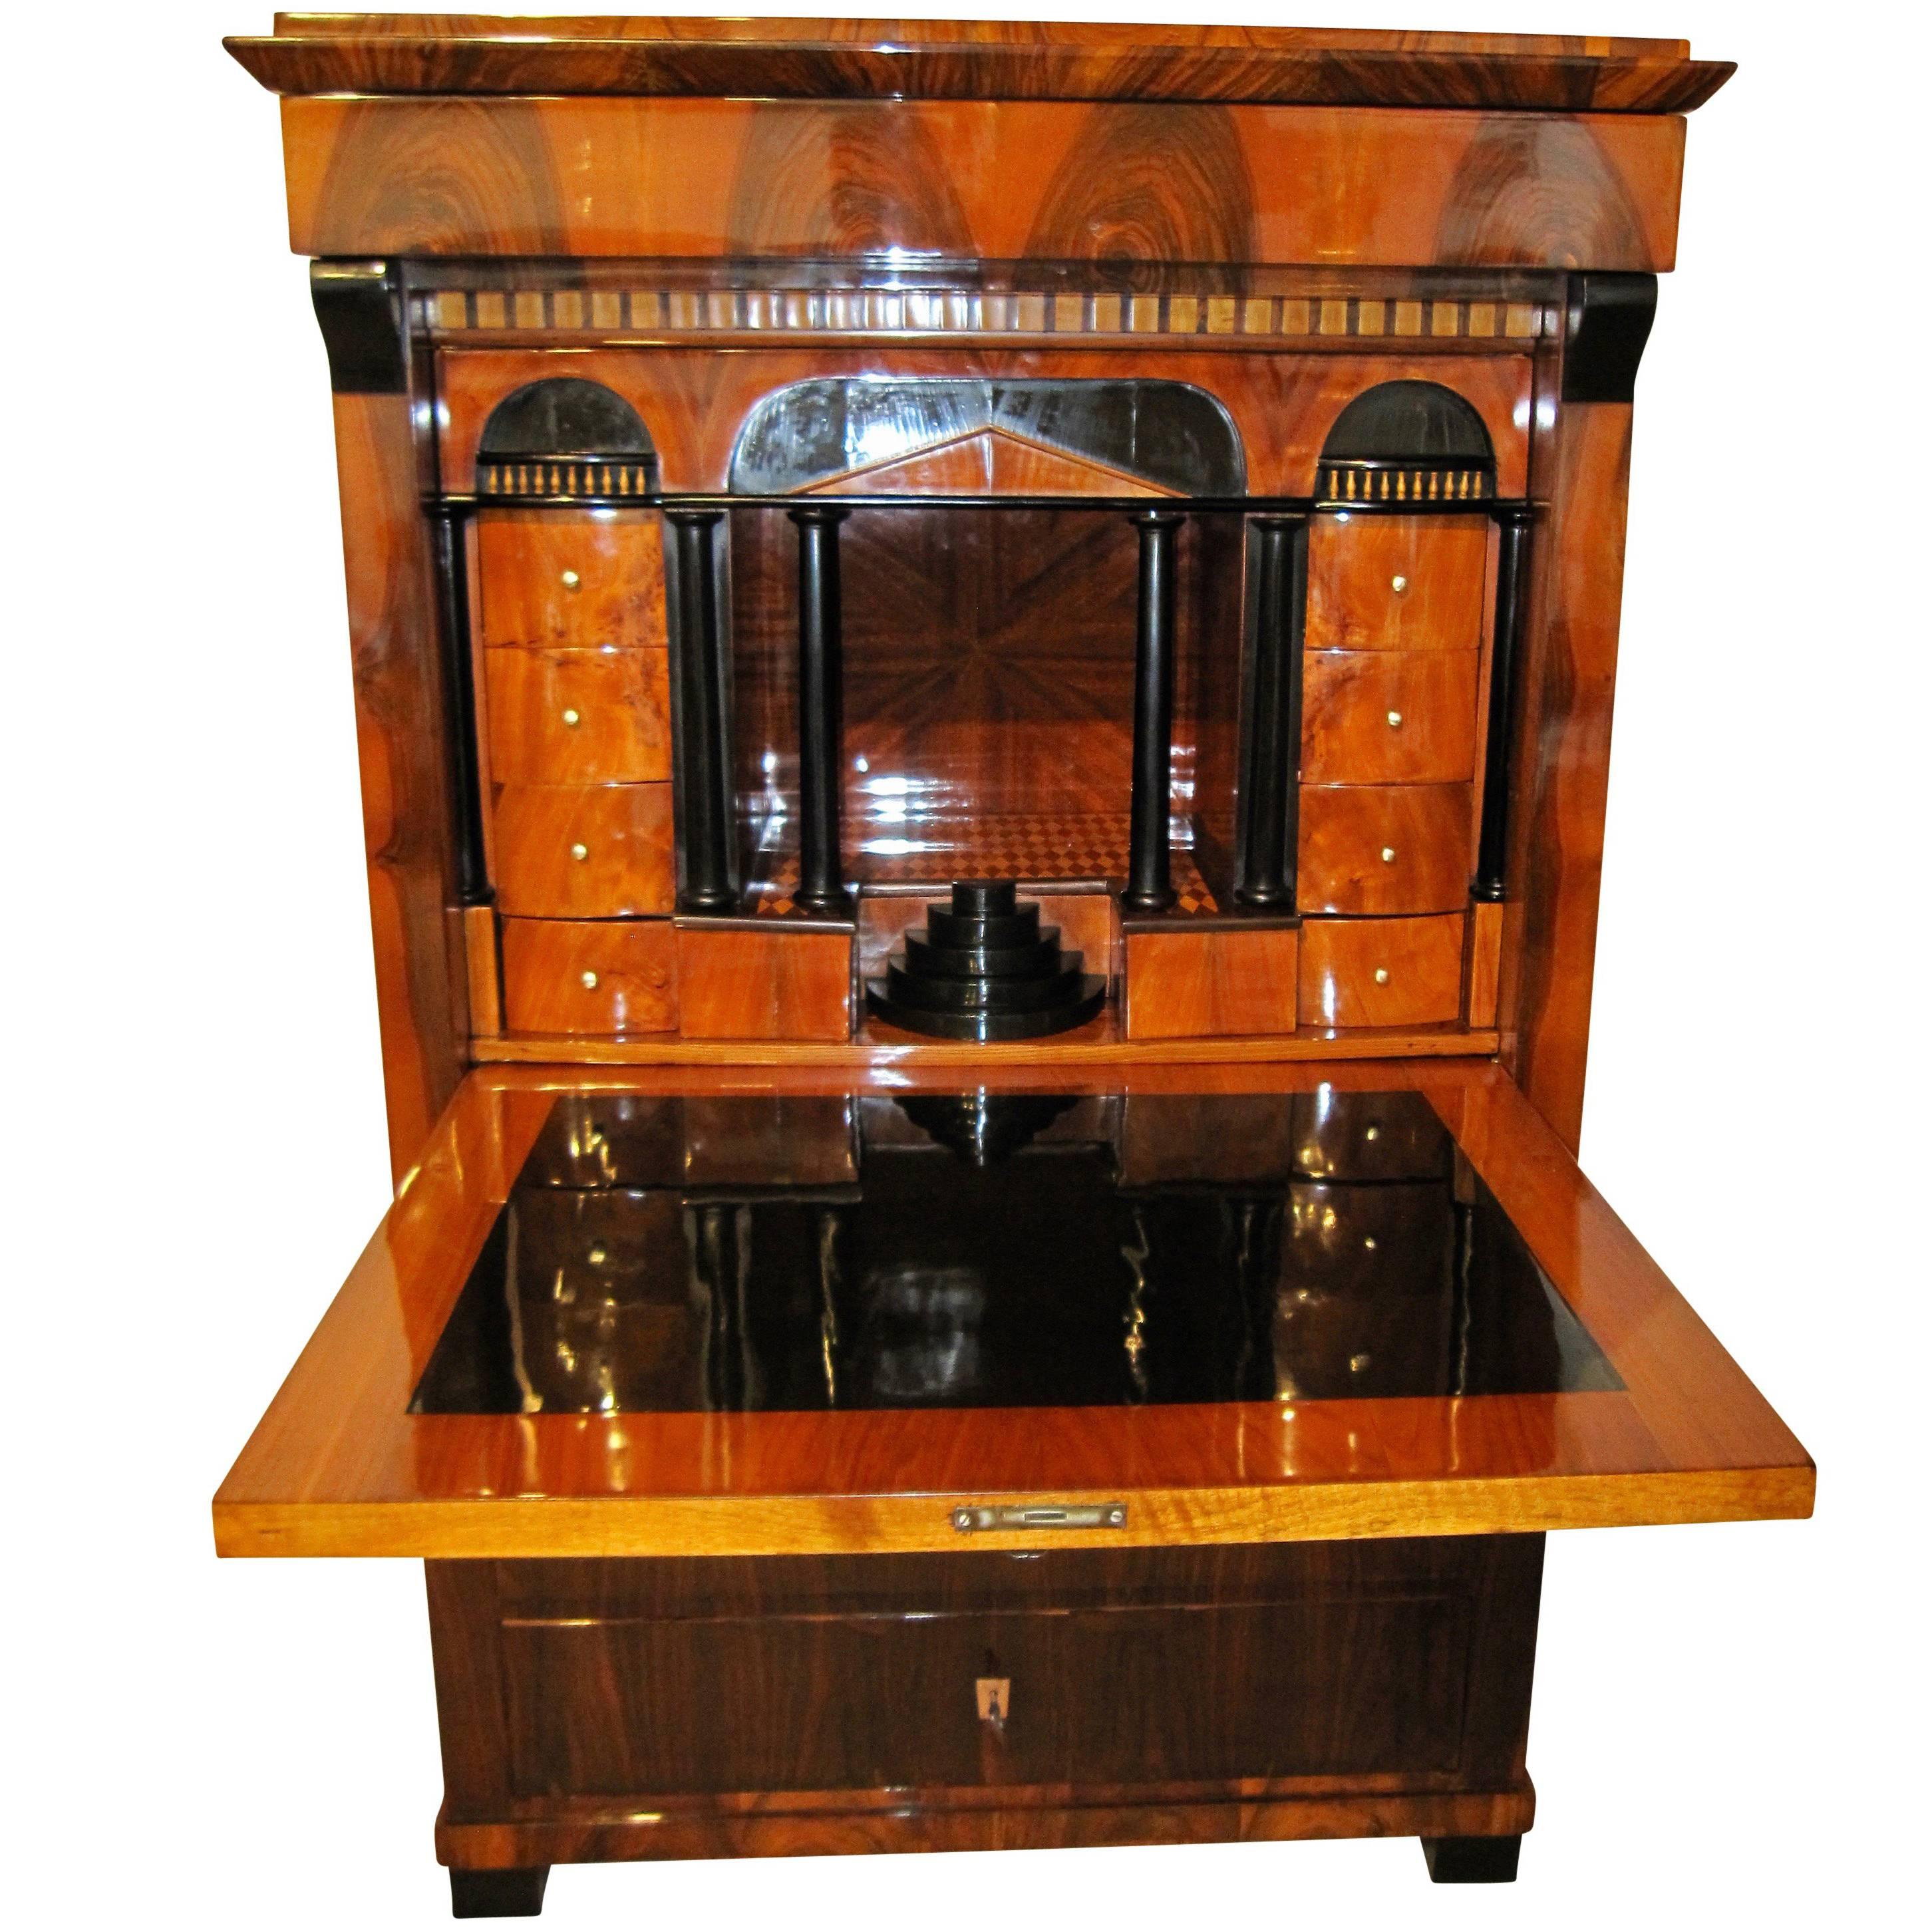 Architecturally interesting classicist Biedermeier secretaire from Southwest Germany about 1820.

This unique piece is completely restored and made in great urban / aristocratic quality.
It has a very beautiful book-matched and symmetrically running